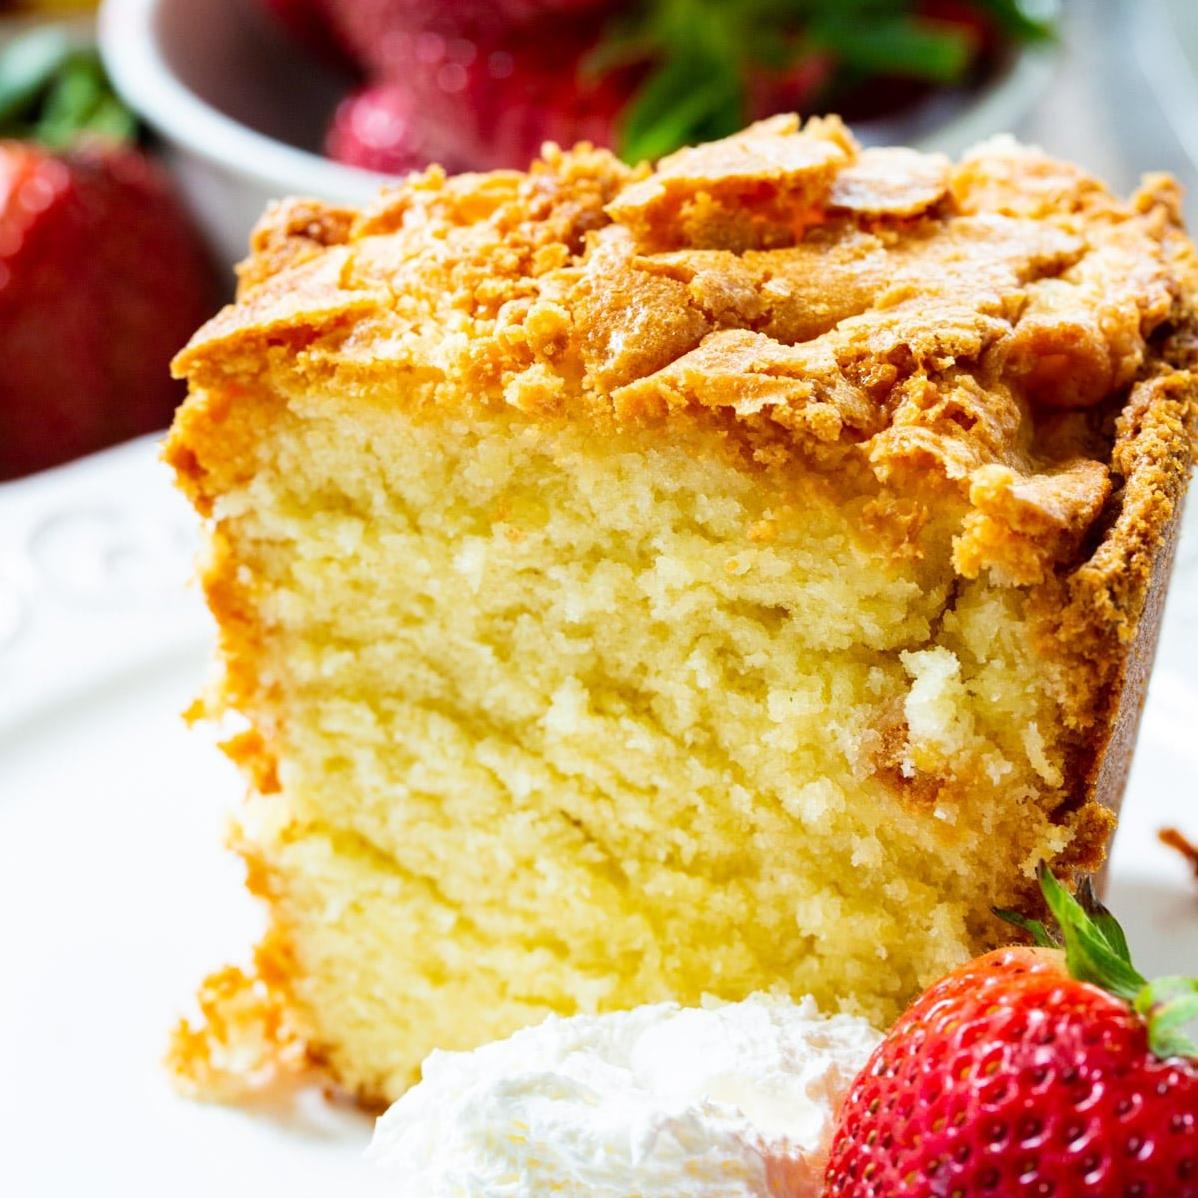  This cake is great for afternoon tea with a dollop of whipped cream and fresh fruit.